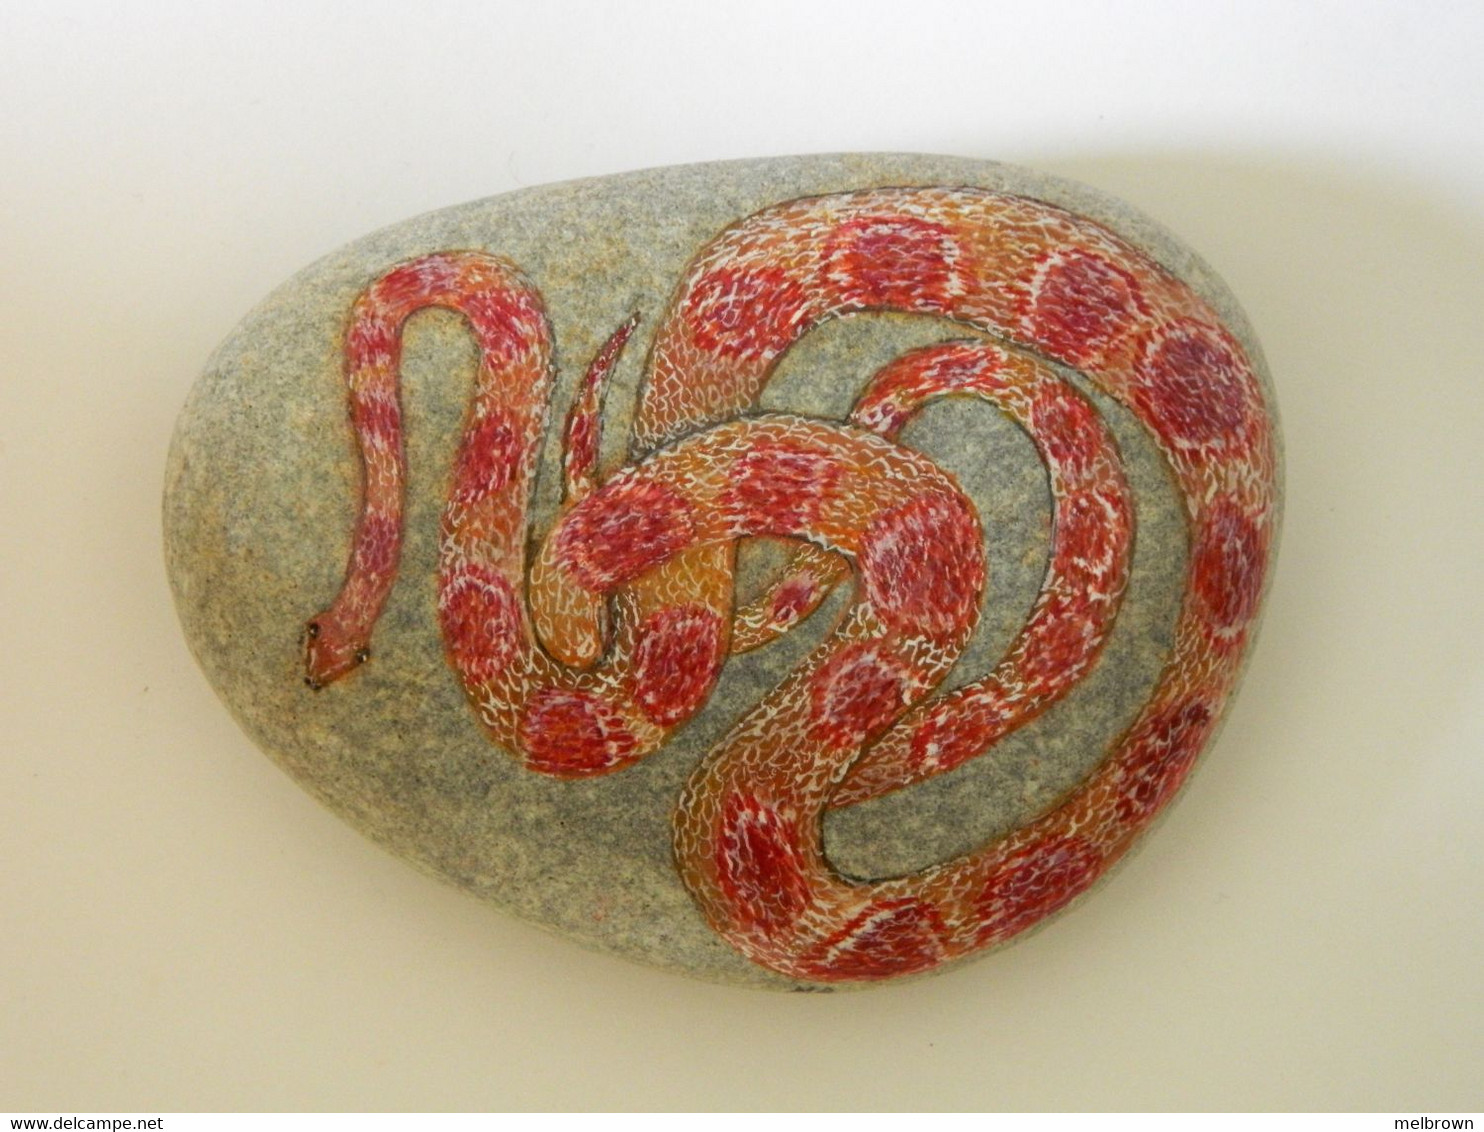 CORN SNAKE Hand Painted On A Beach Stone Paperweight Decoration - Paper-weights